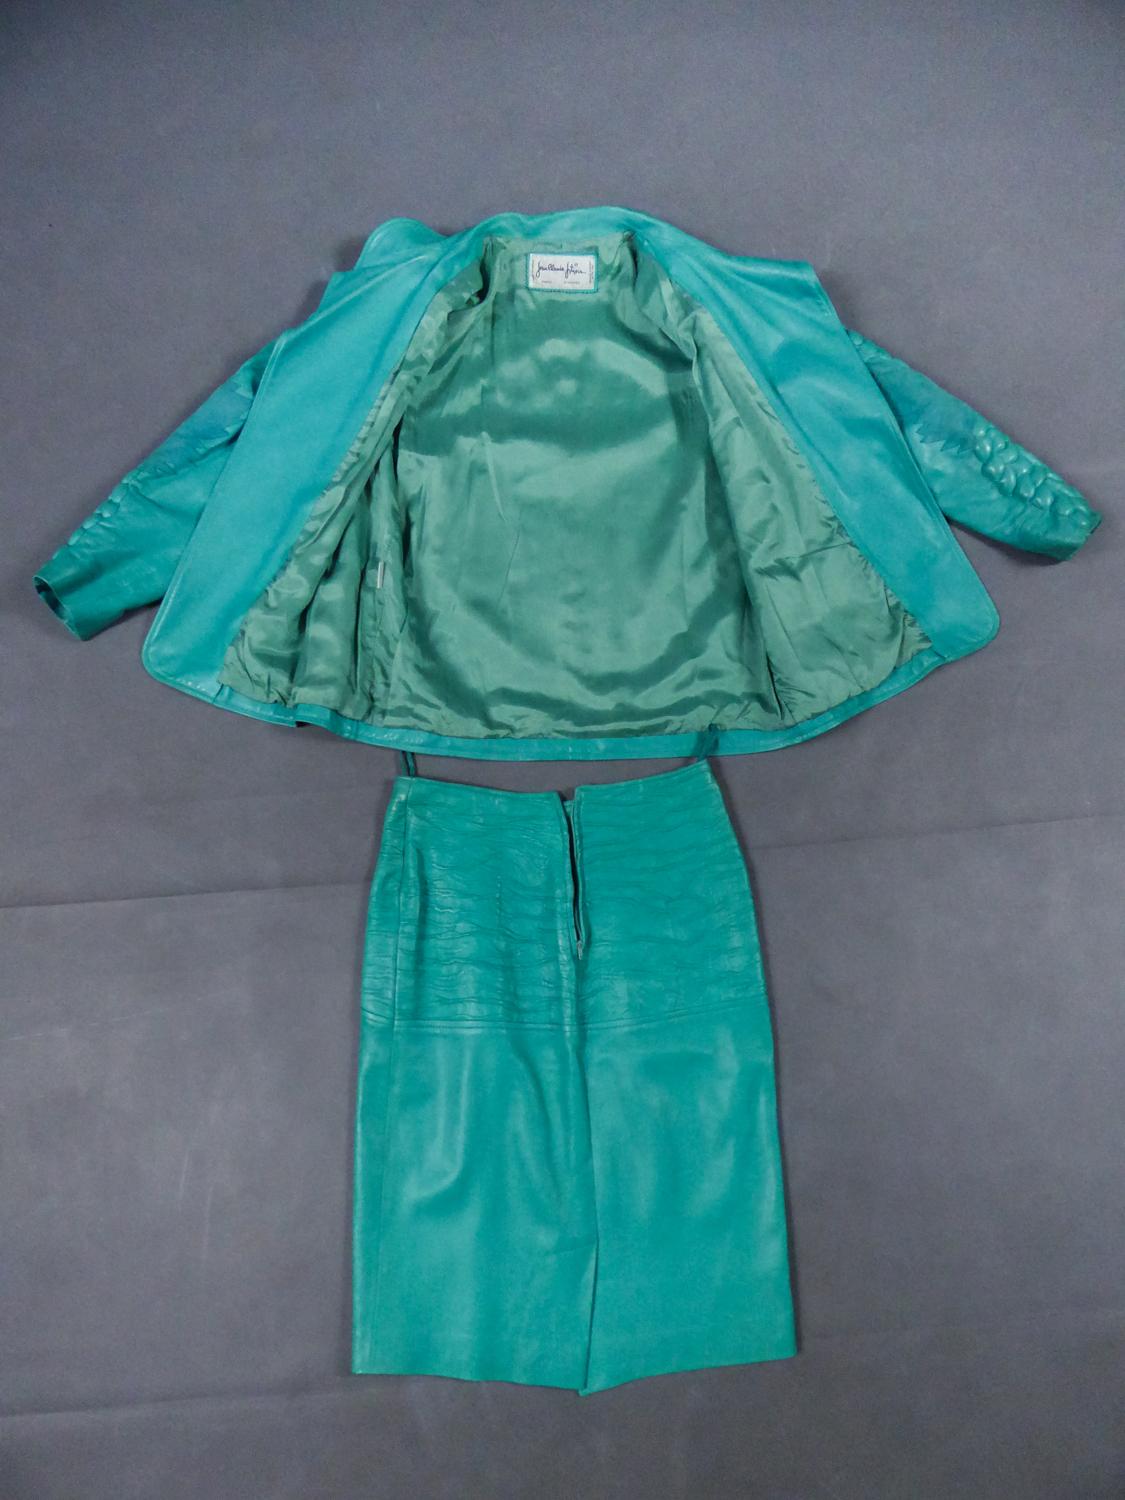 Collection Autumn Winter Fall 1985/1986
France

Skirt and jacket set in turquoise dipped lambskin by Jean-Claude Jitrois Collection Autumn Winter Fall 1985/1986. Jacket with small collar and leg of mutton sleeves with a quilted scales pattern